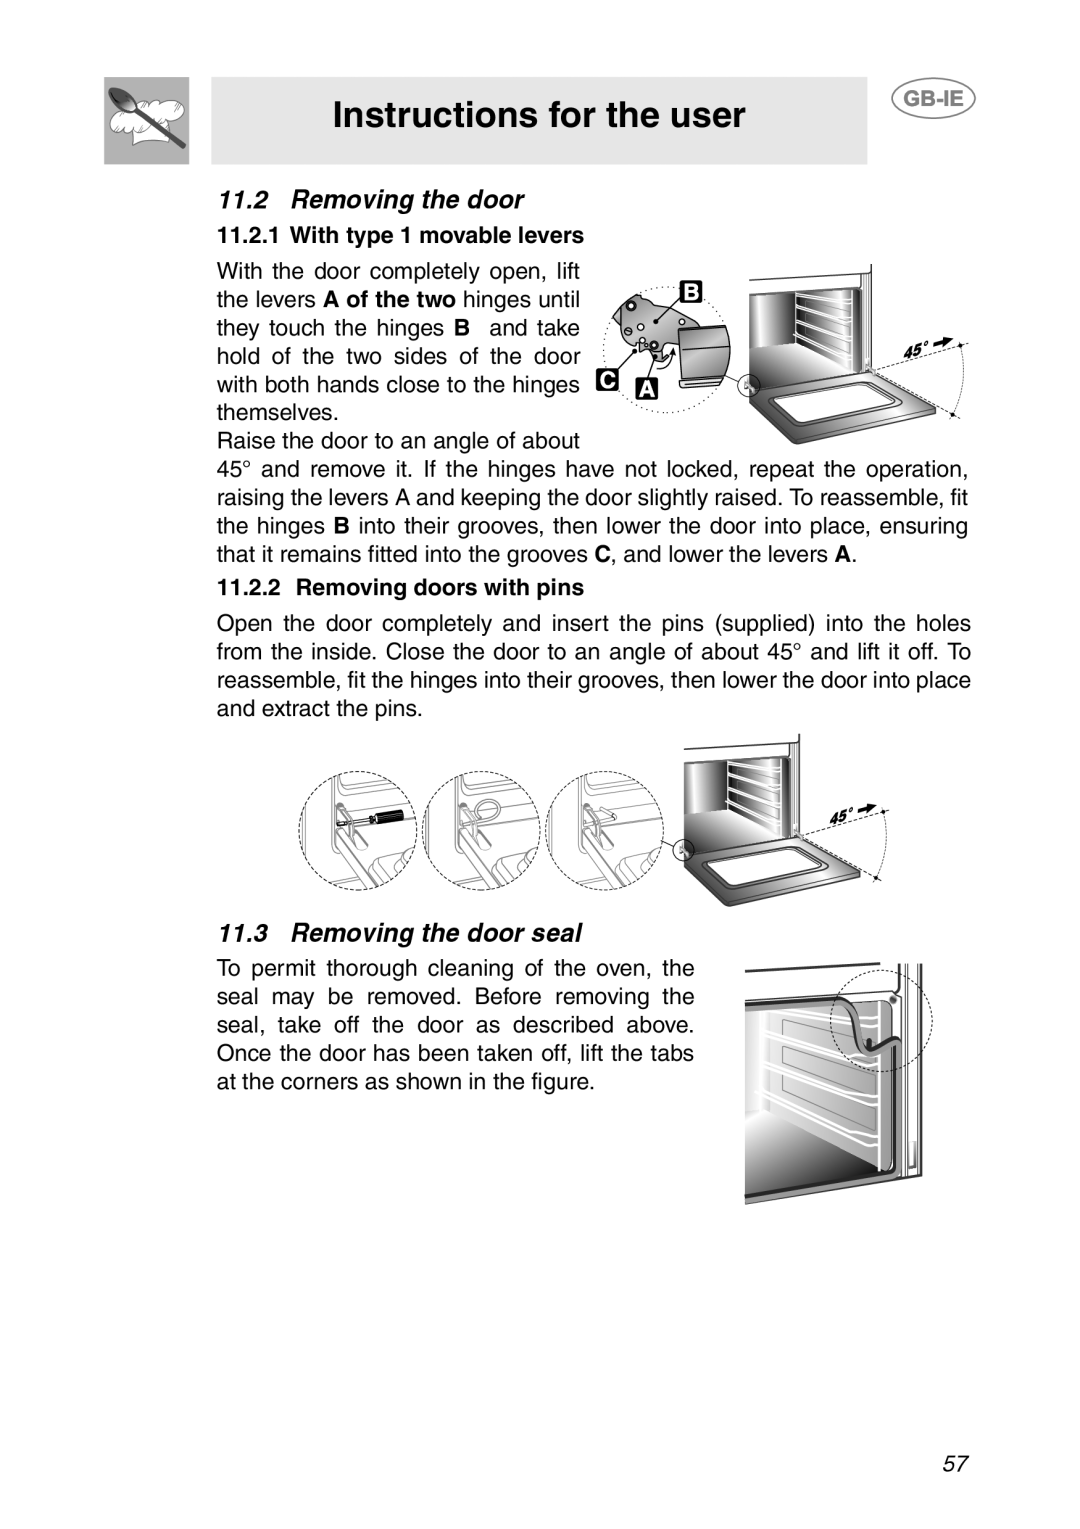 Smeg FP131B1 manual Instructions for the user, Removing the door seal, Removing the door 11.2.1 With type 1 movable levers 